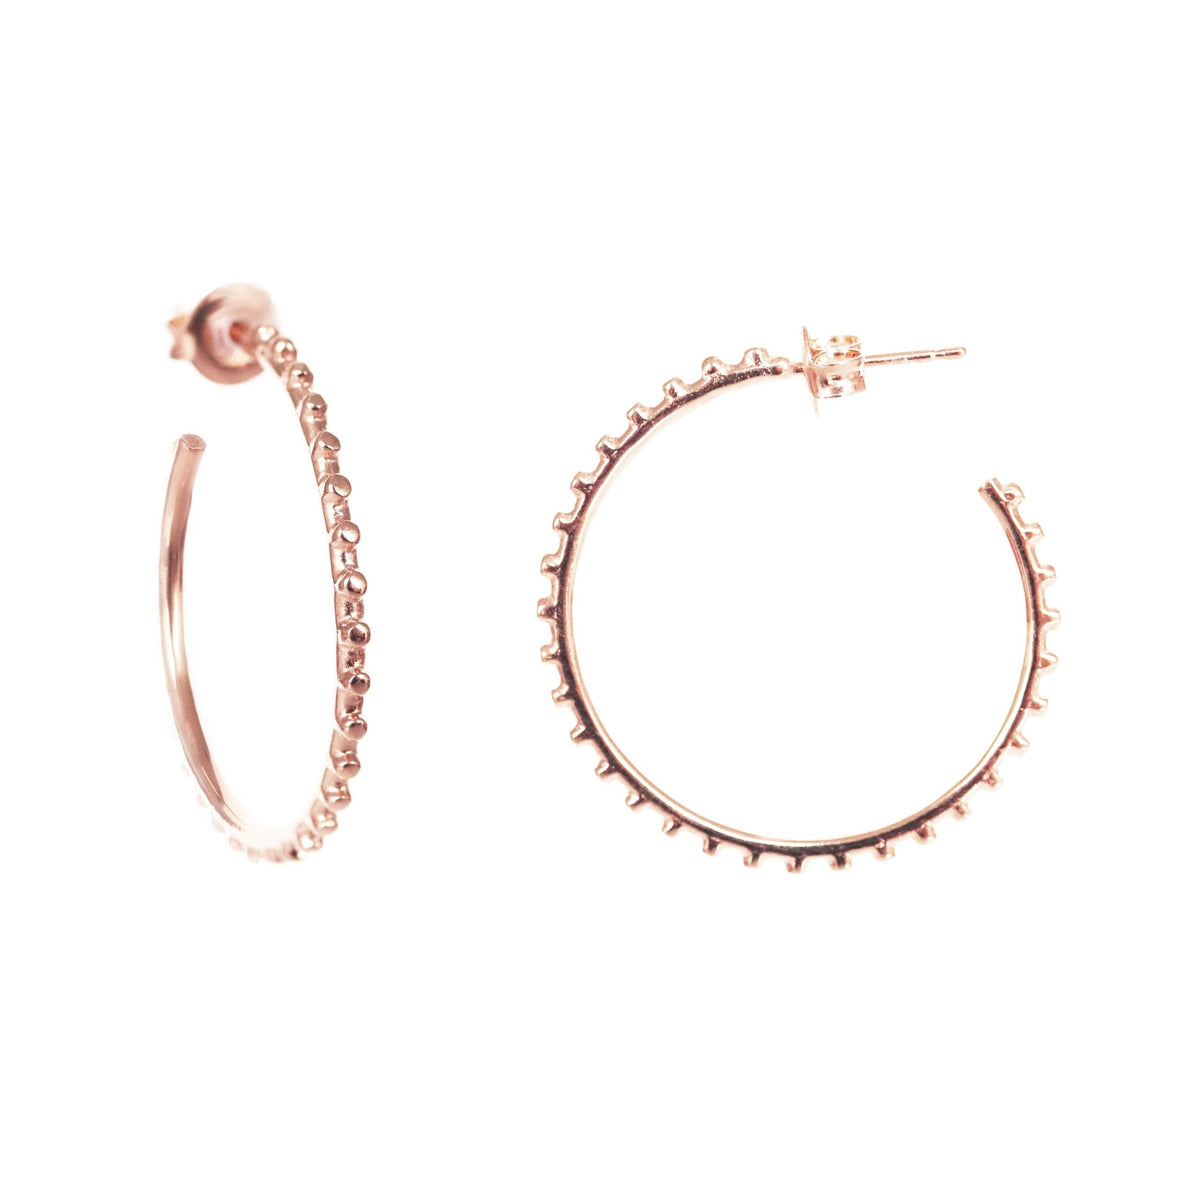 BELIEVE SOLEIL HOOPS - ROSE GOLD - SO PRETTY CARA COTTER